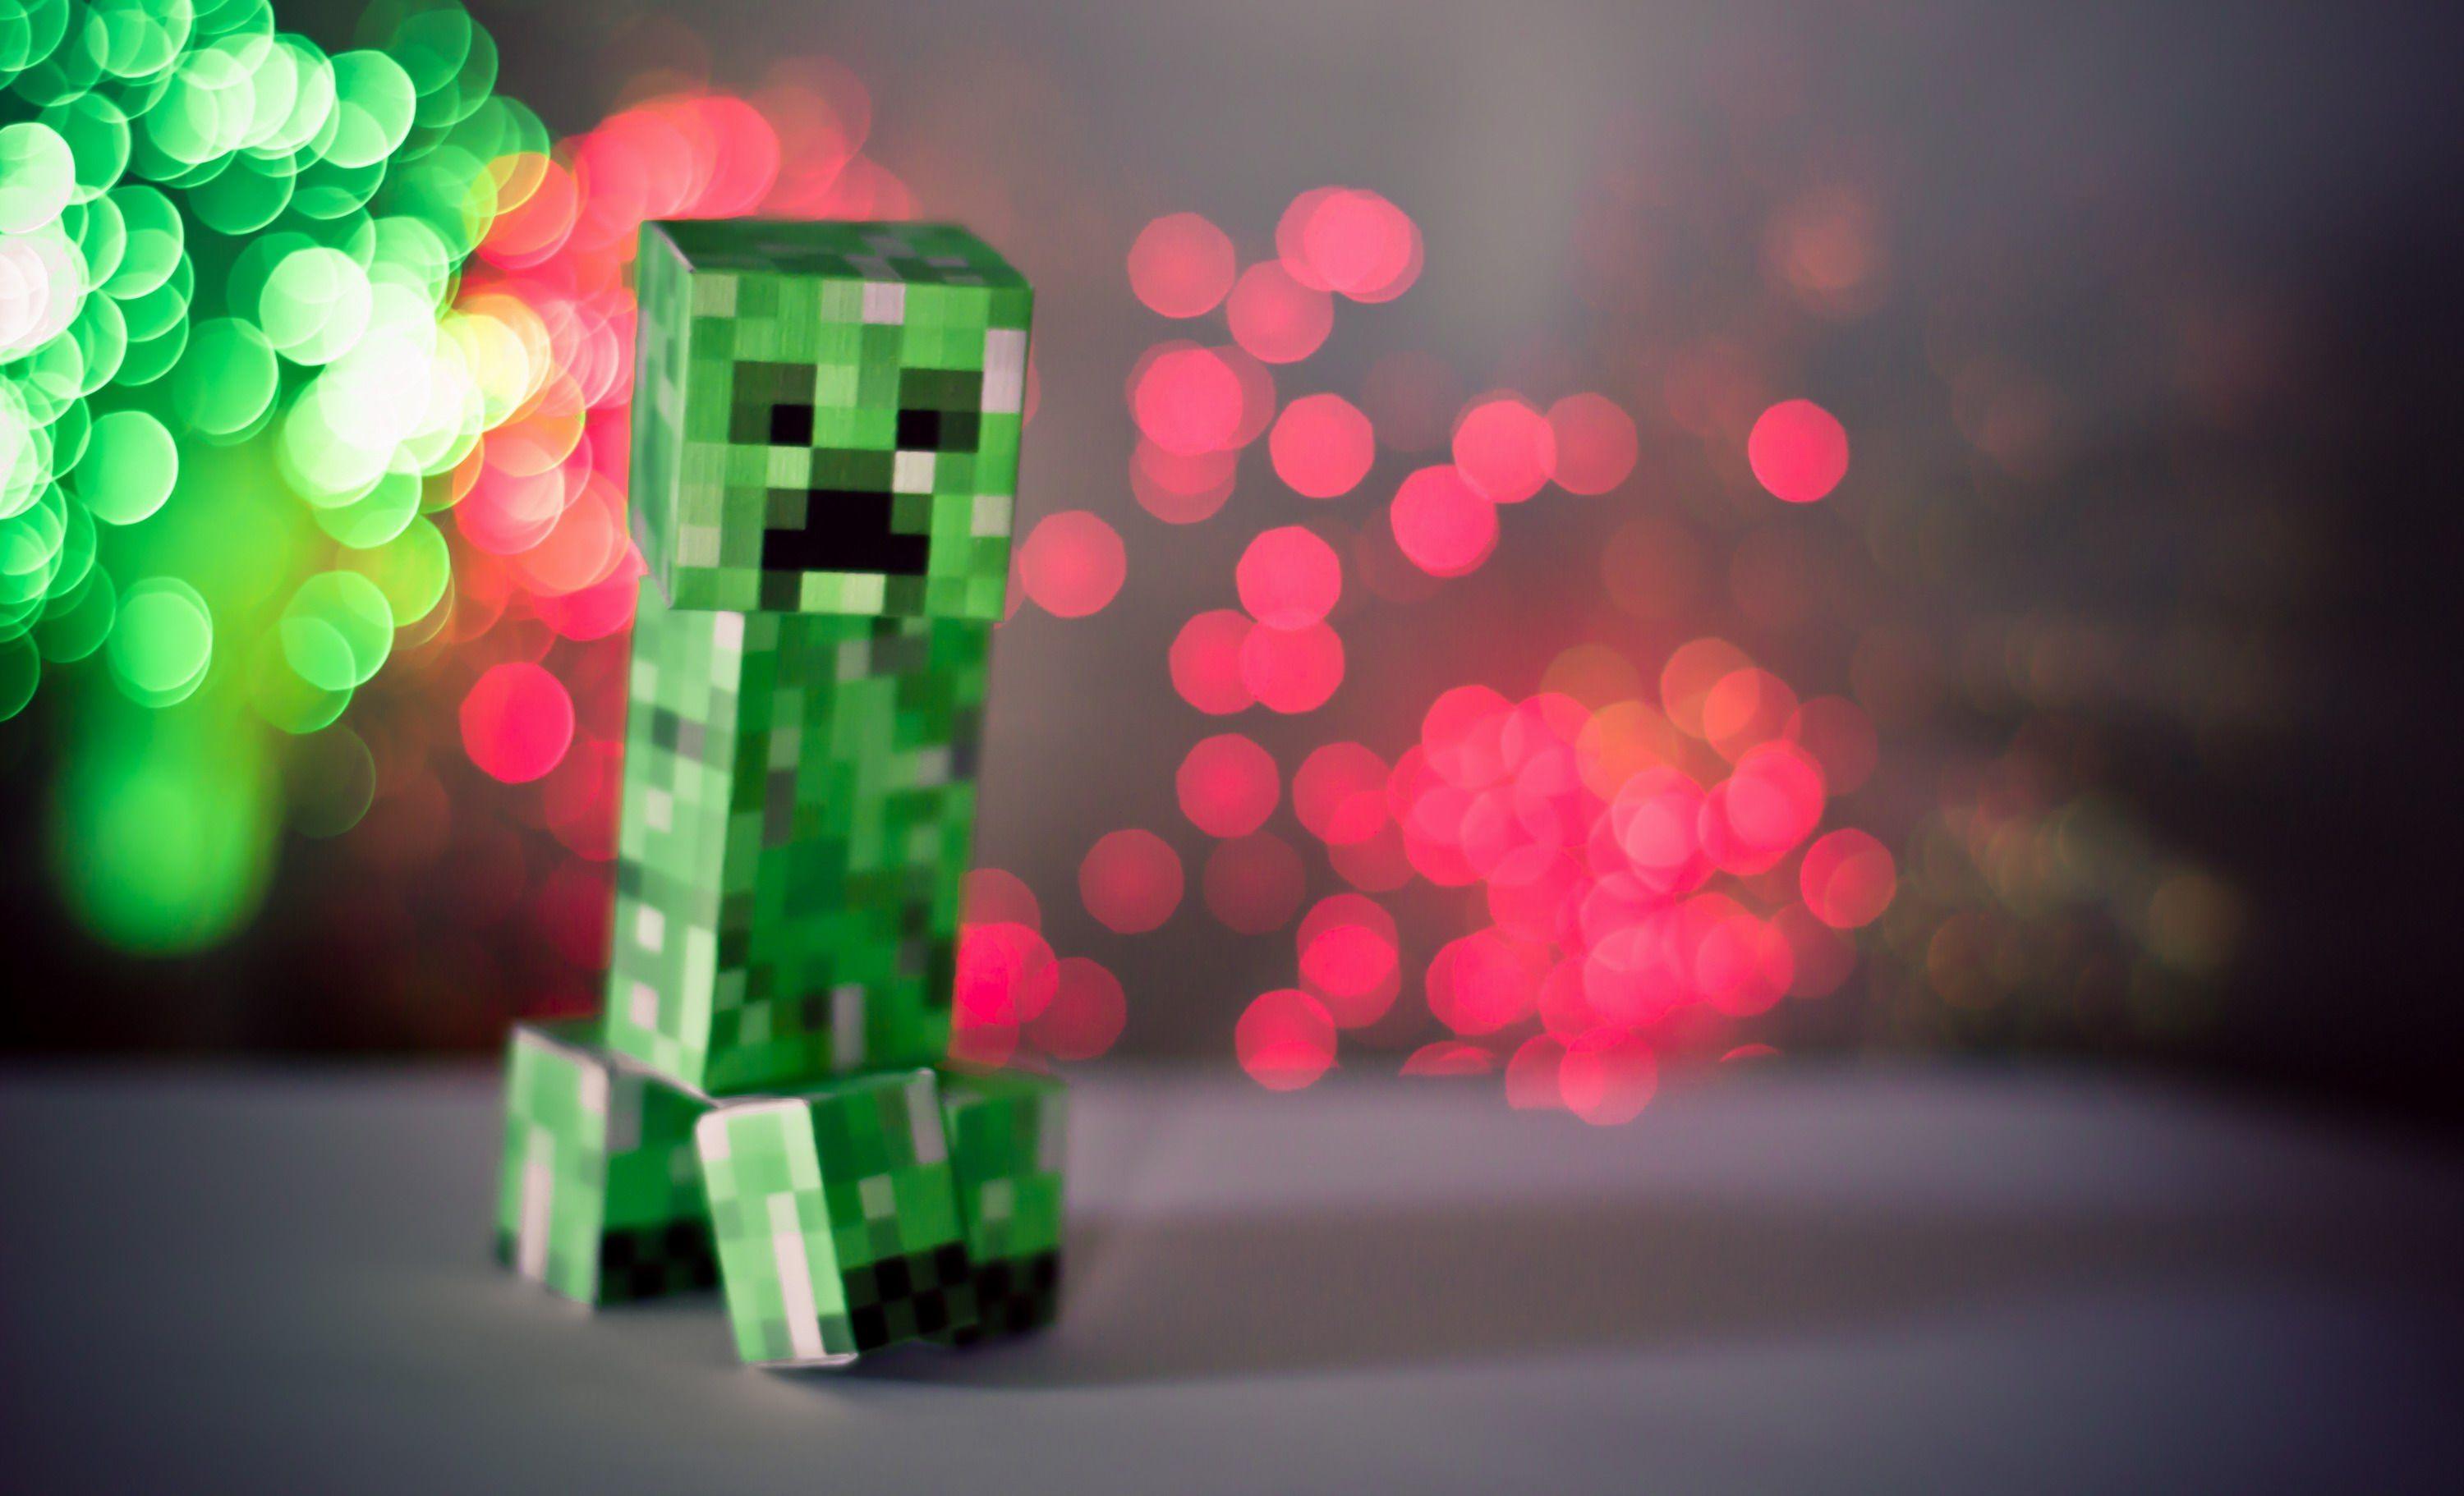 Minecraft Cute Wallpapers  Wallpaper Cave